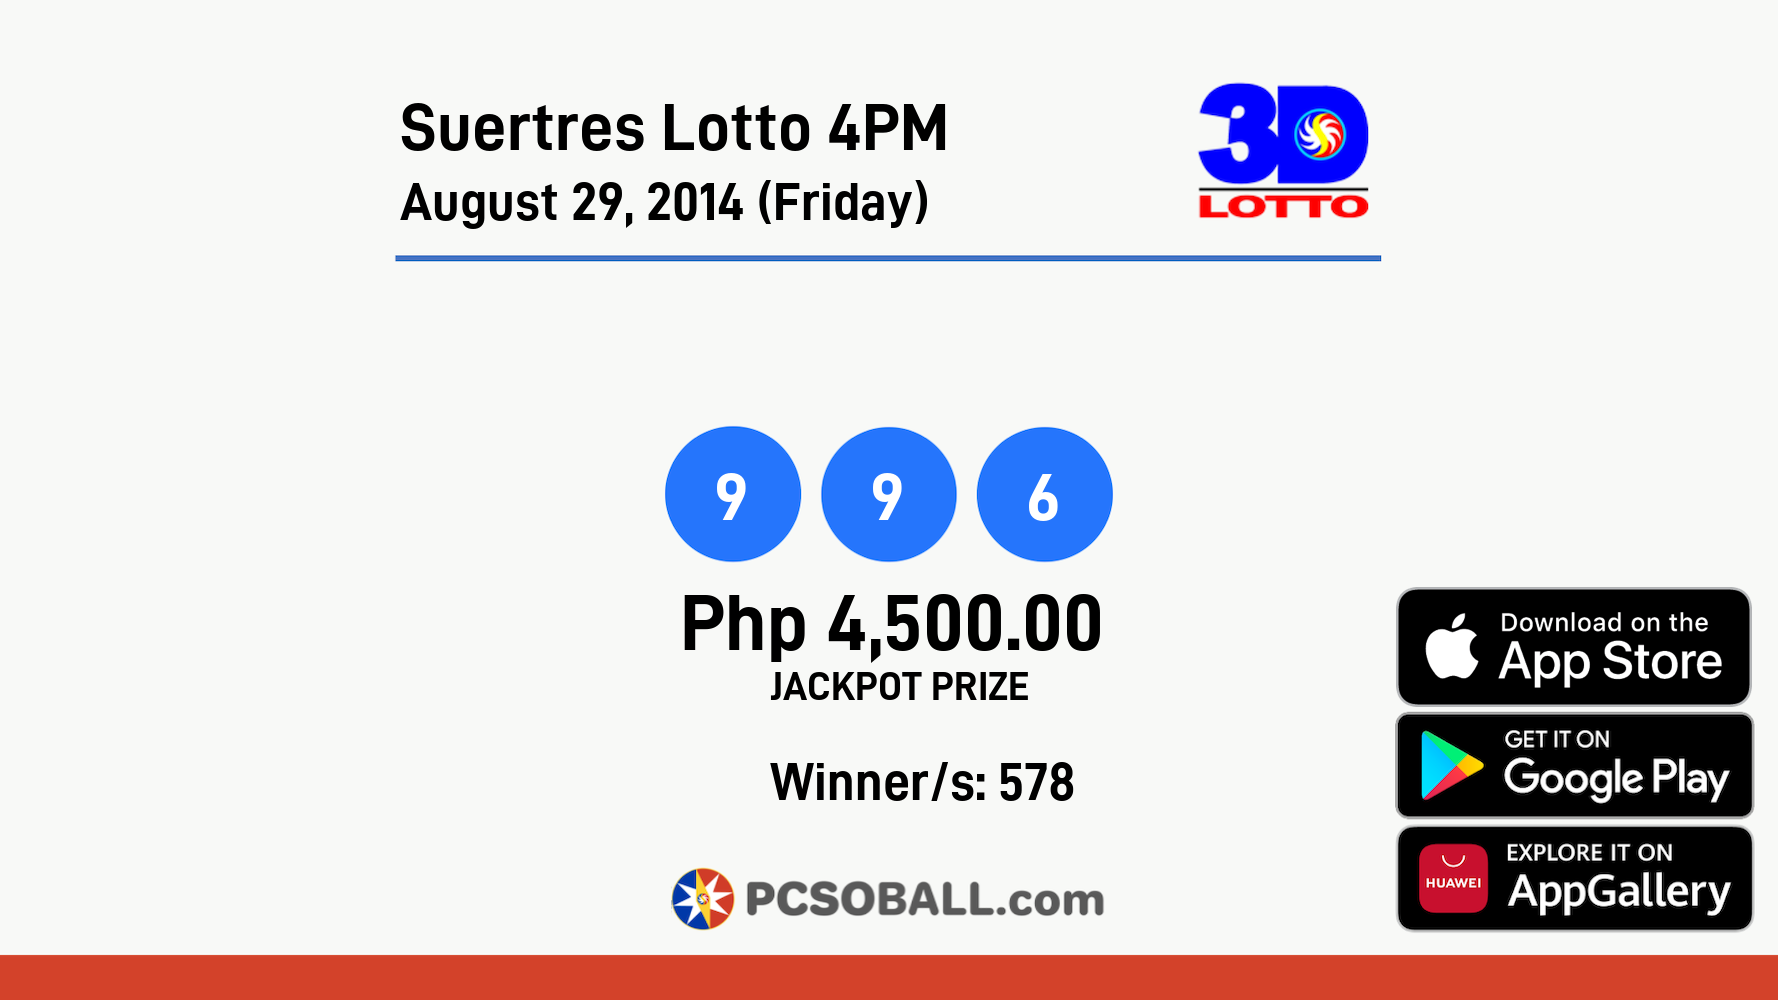 Suertres Lotto 4PM August 29, 2014 (Friday) Result